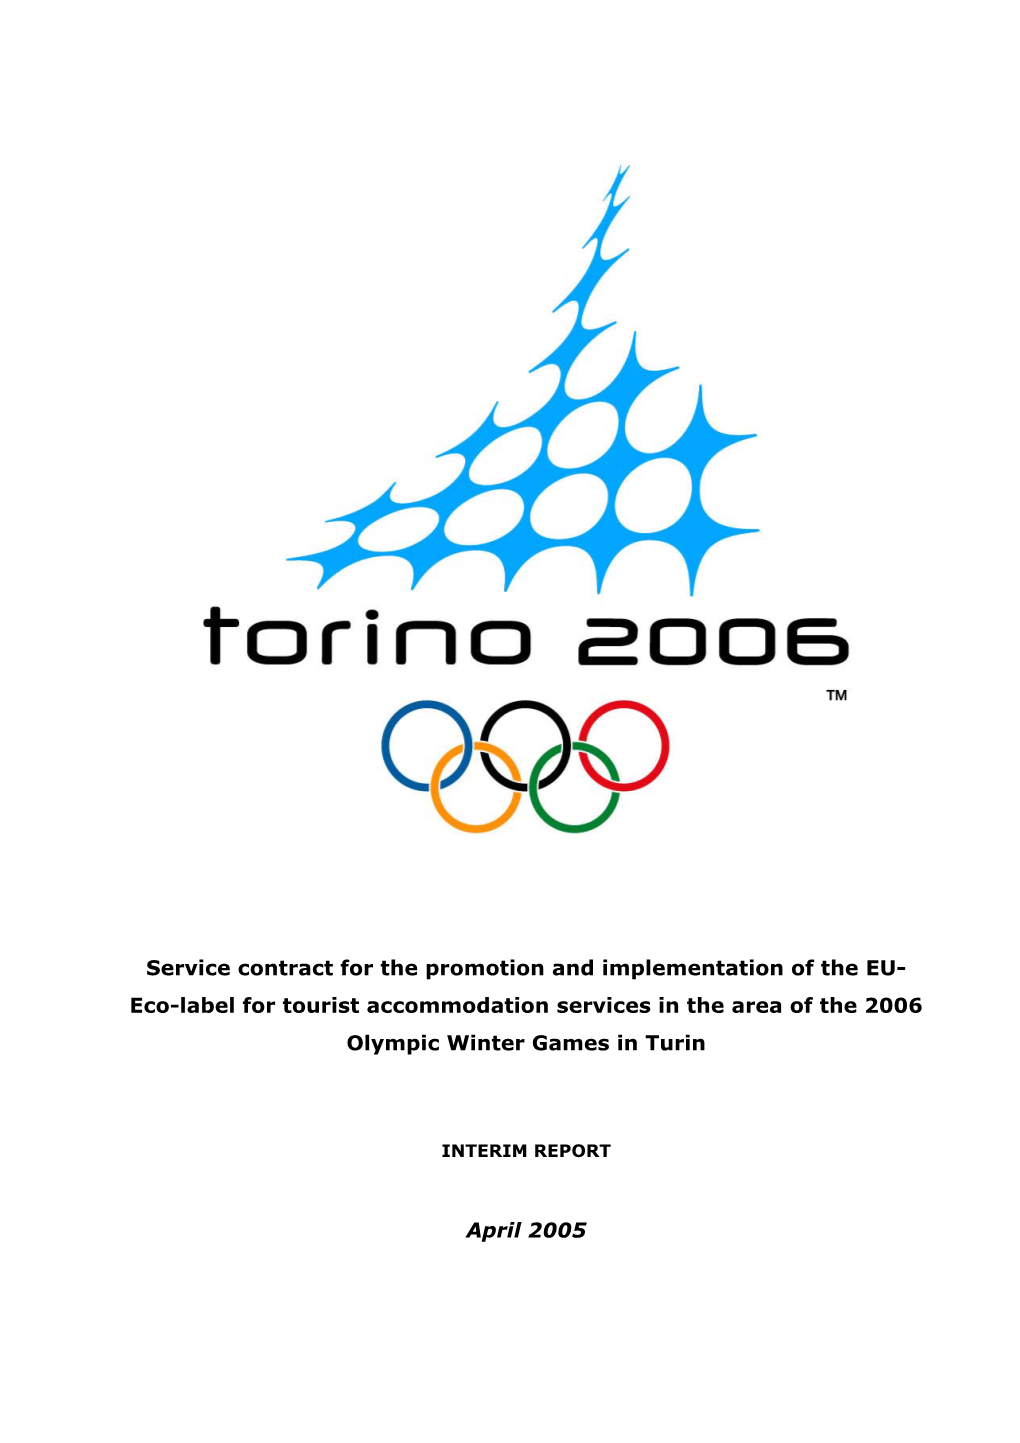 Eco-Label for Tourist Accommodation Services in the Area of the 2006 Olympic Winter Games in Turin